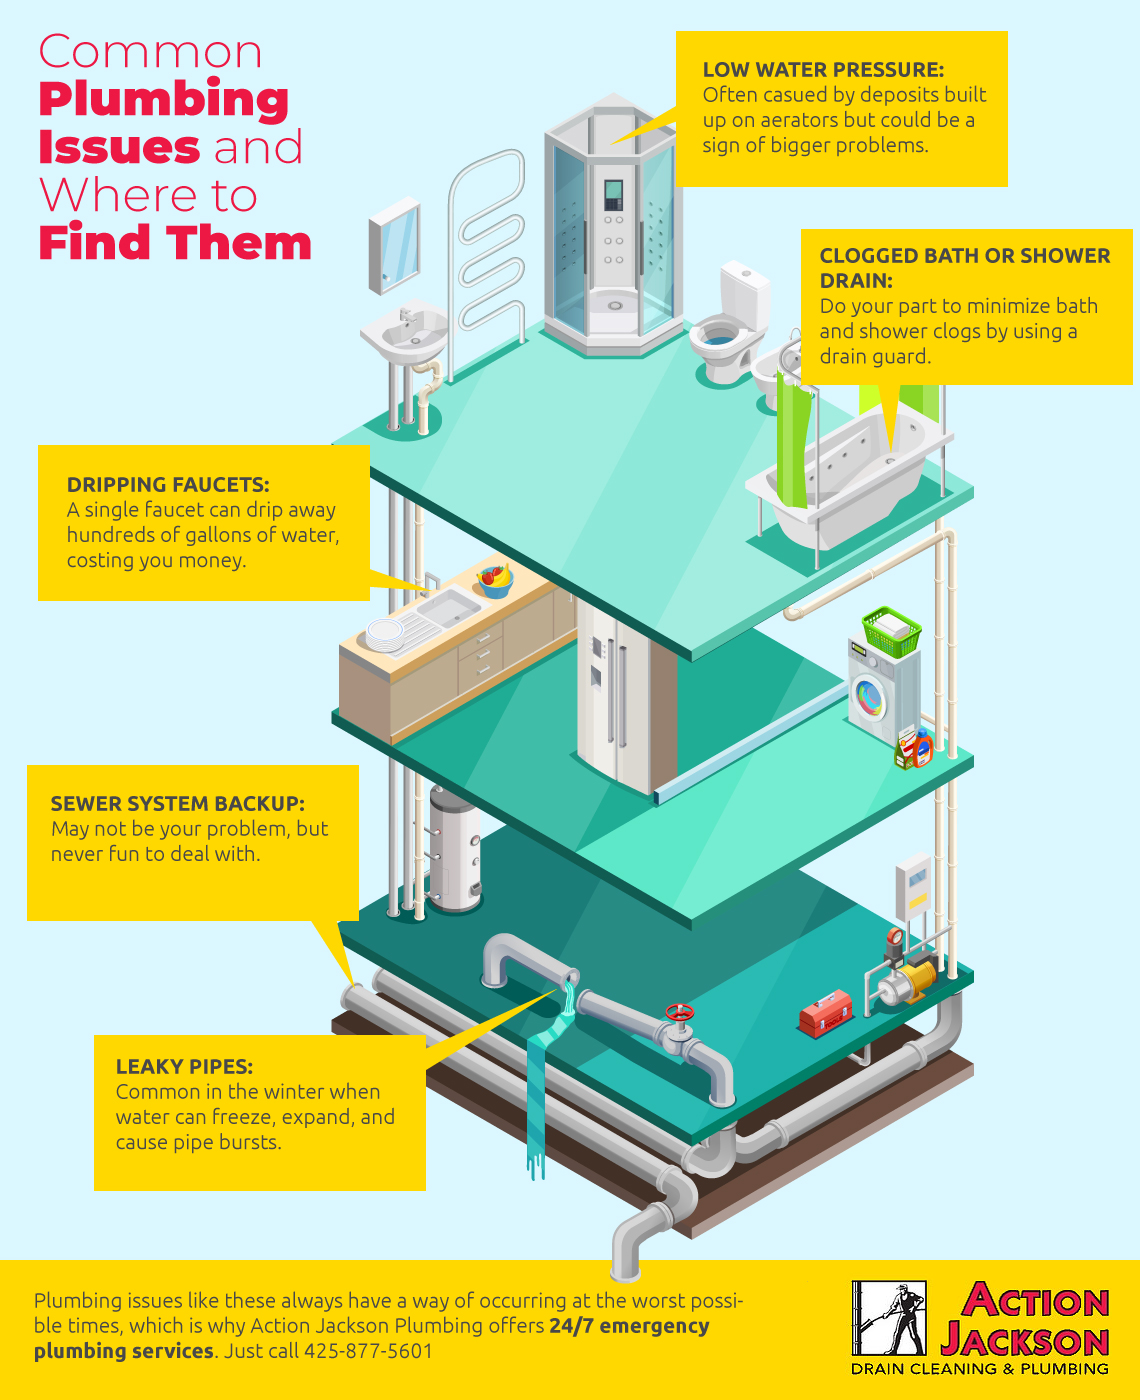 common plumbing issues and where to find them infographic